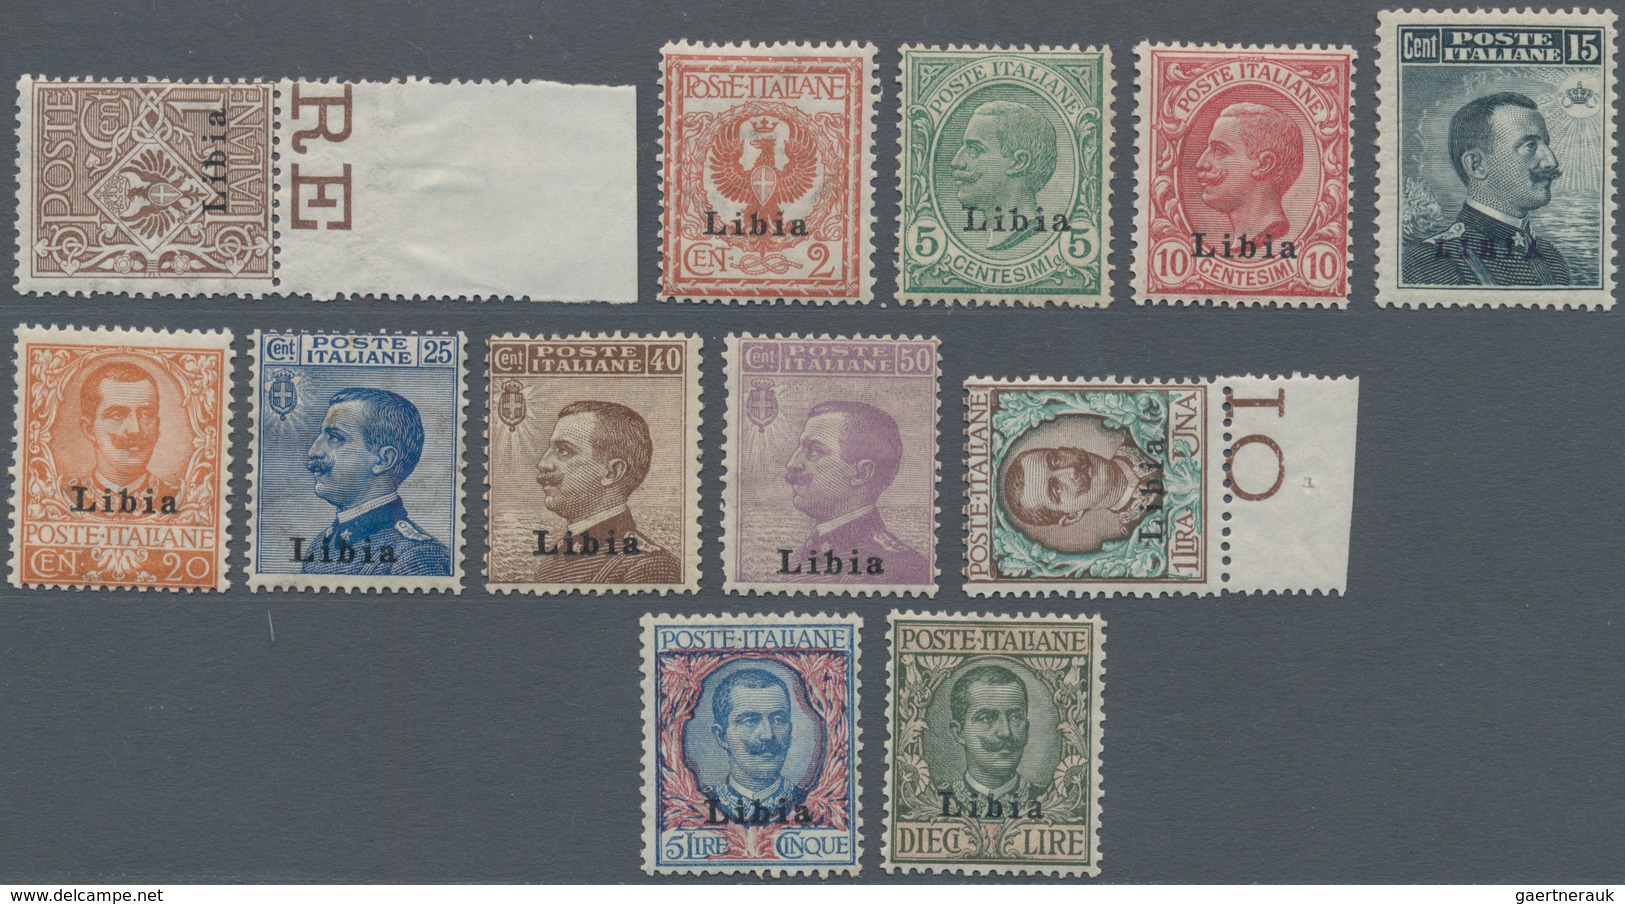 01058 Italienisch-Libyen: 1912/1915: Stamps Of Italy "Michetti" And "Floreale" With Overprint LIBIA, Compl - Libia